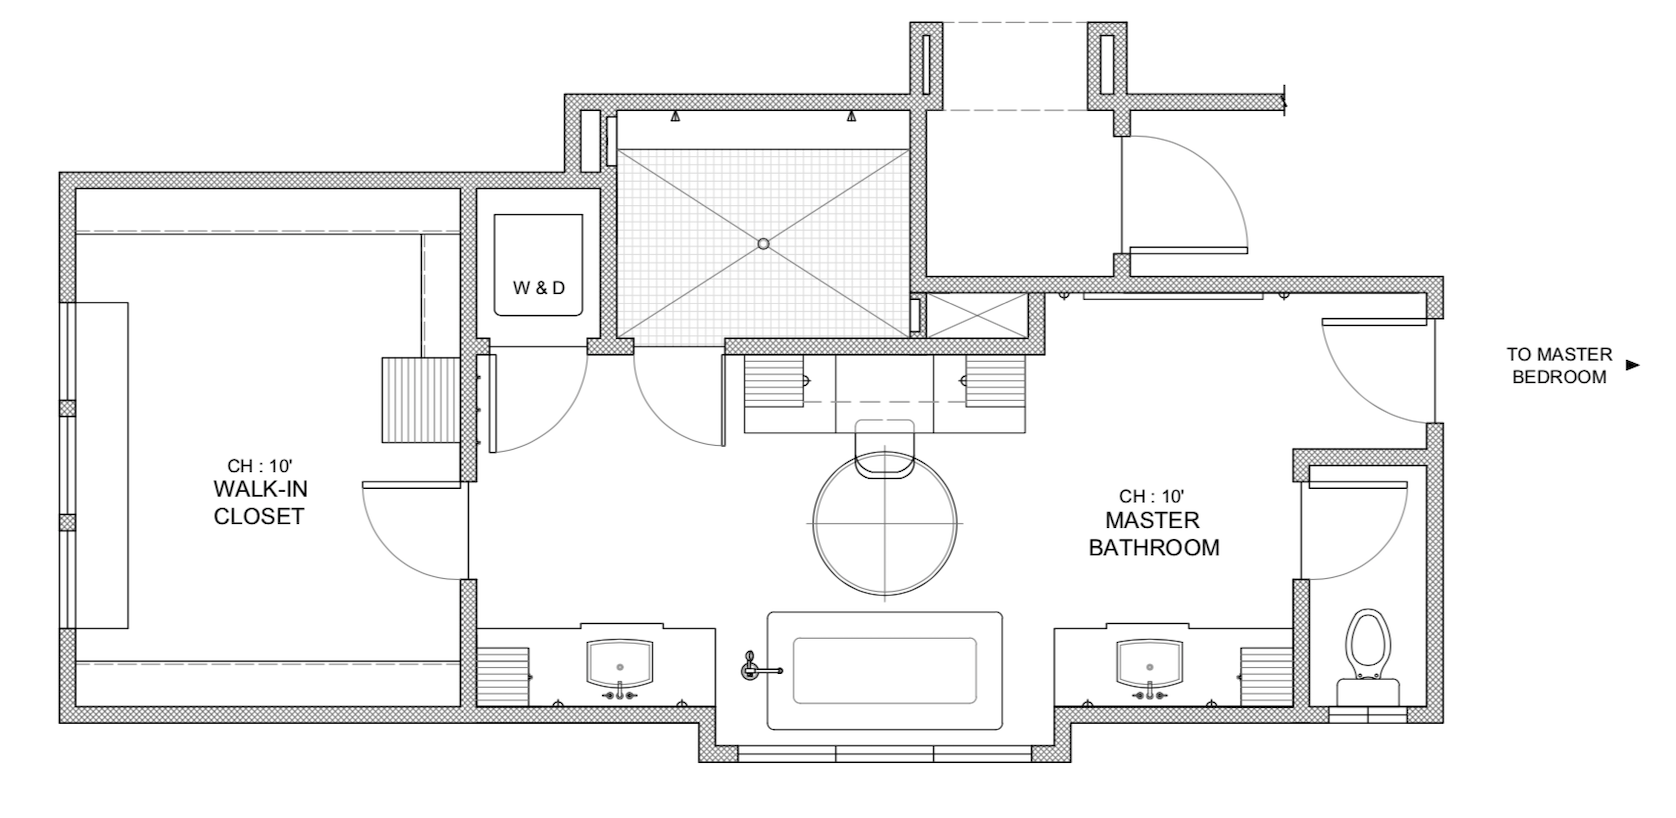 Getting The Most Out Of A Bathroom Floor Plan Tami Faulkner Design,Where Is Princess Diana Buried Grave